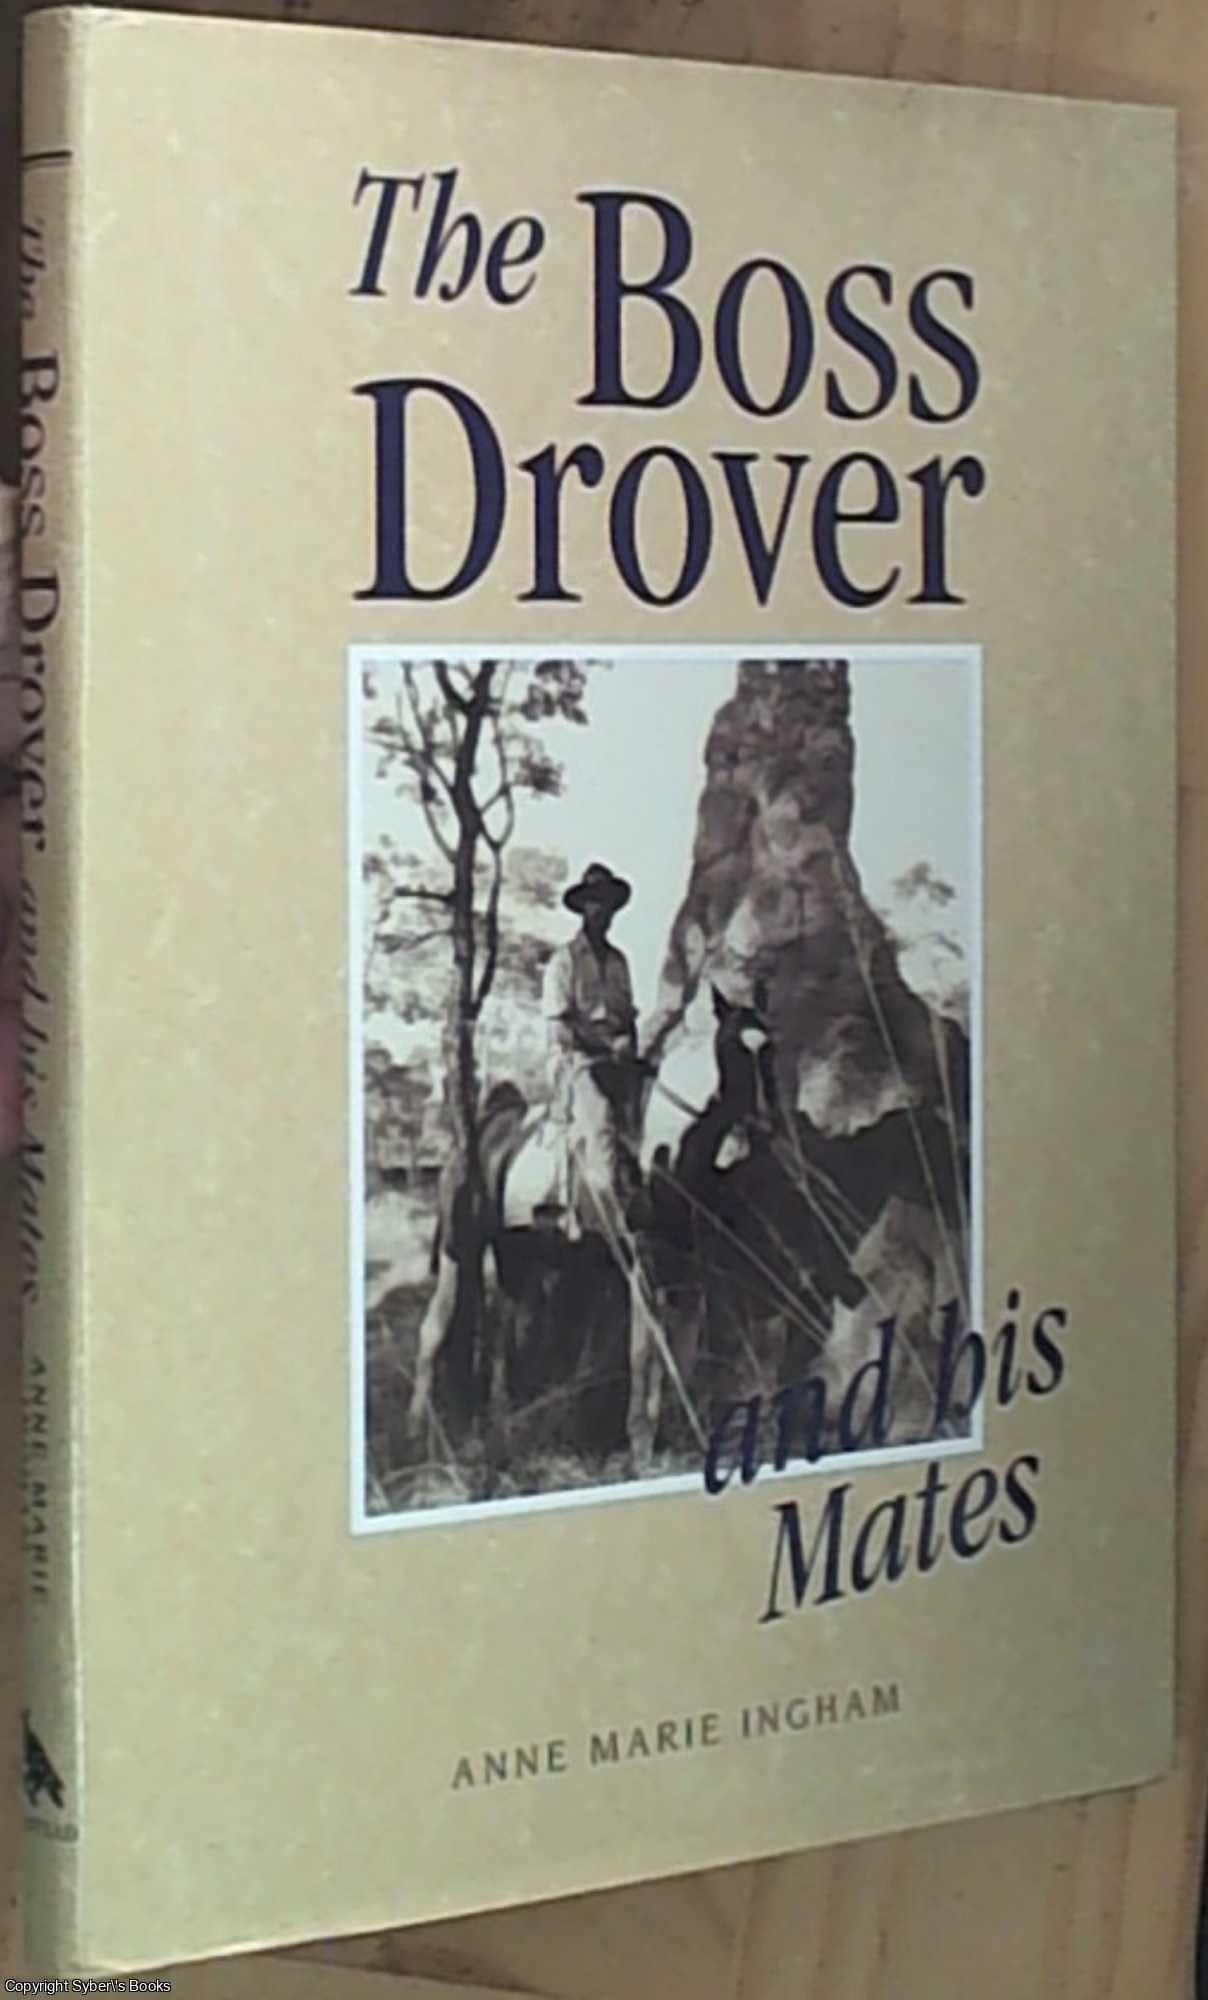 Ingham, Anne Marie - The Boss Drover and his Mates